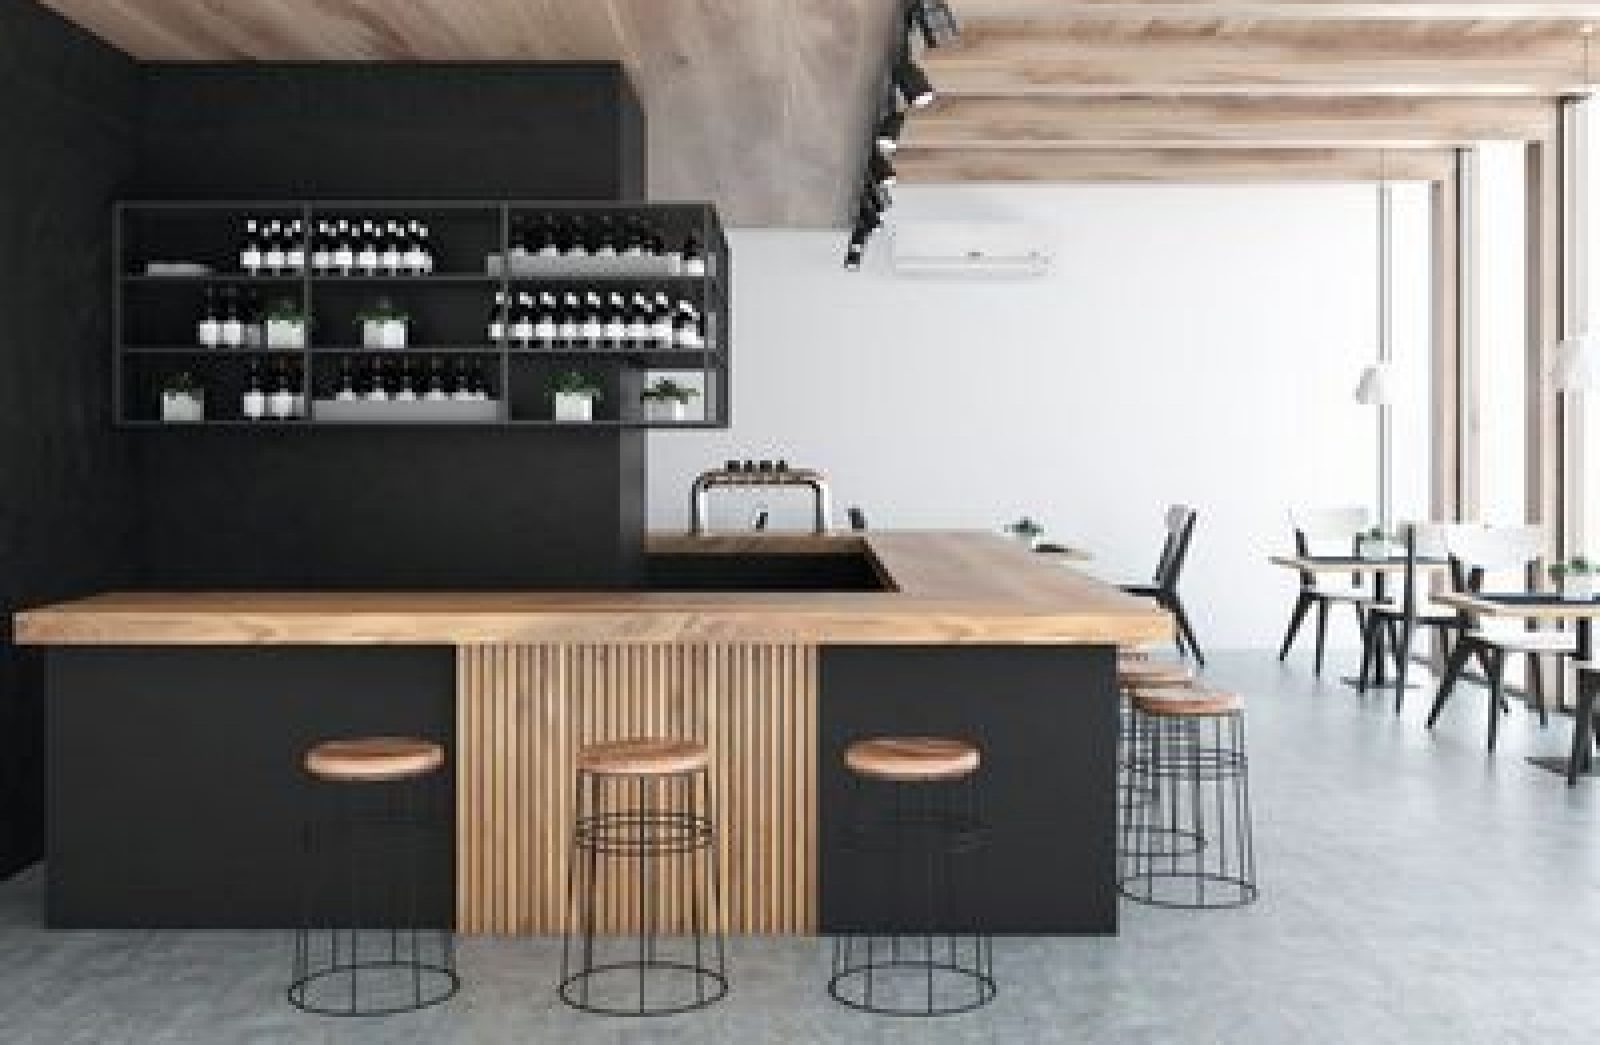 Front view of a black wall bar interior with a concrete floor, a wooden bar and rows of stools standing near it. 3d rendering mock up; Shutterstock ID 1074757415; Client/Licensee: -